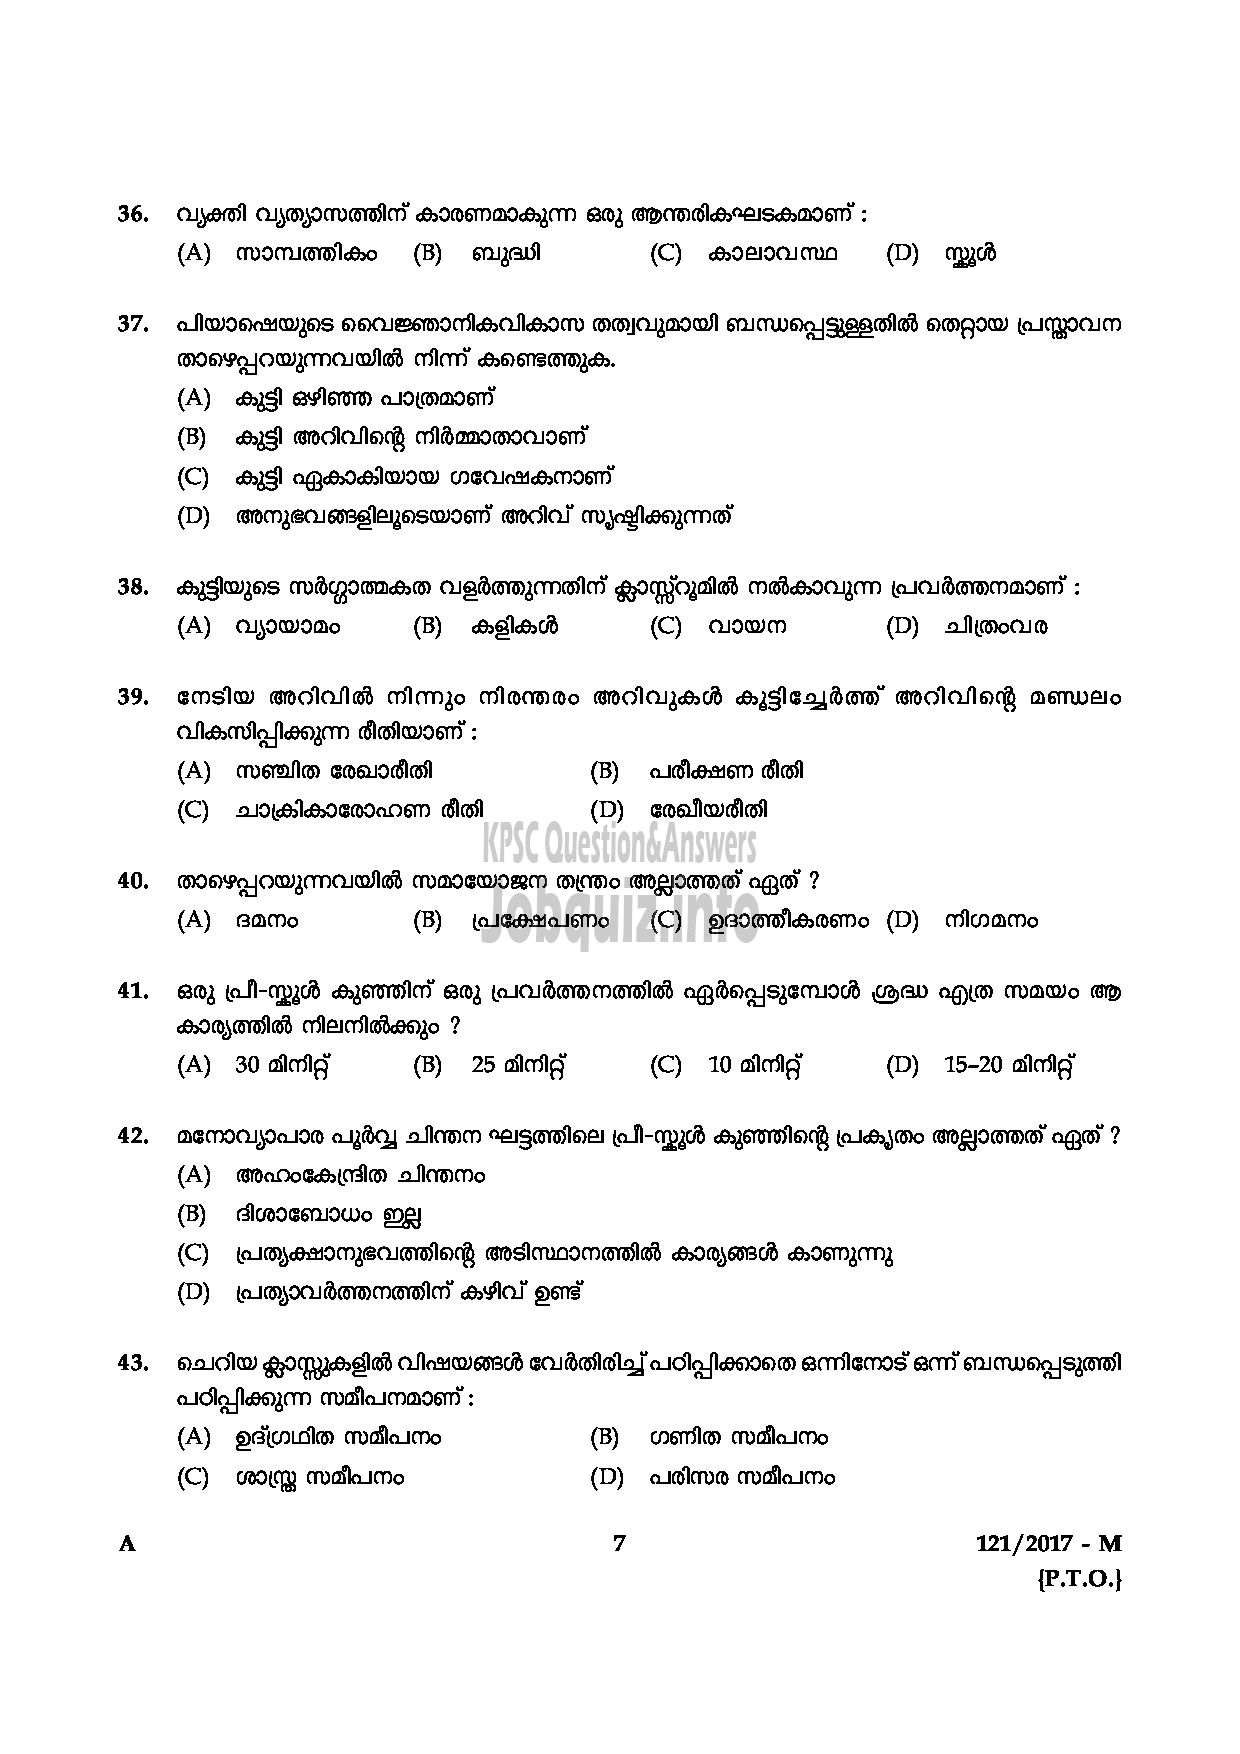 Kerala PSC Question Paper - PRE PRIMARY TEACHER EDUCATION MALAYALAM QUESTION -7